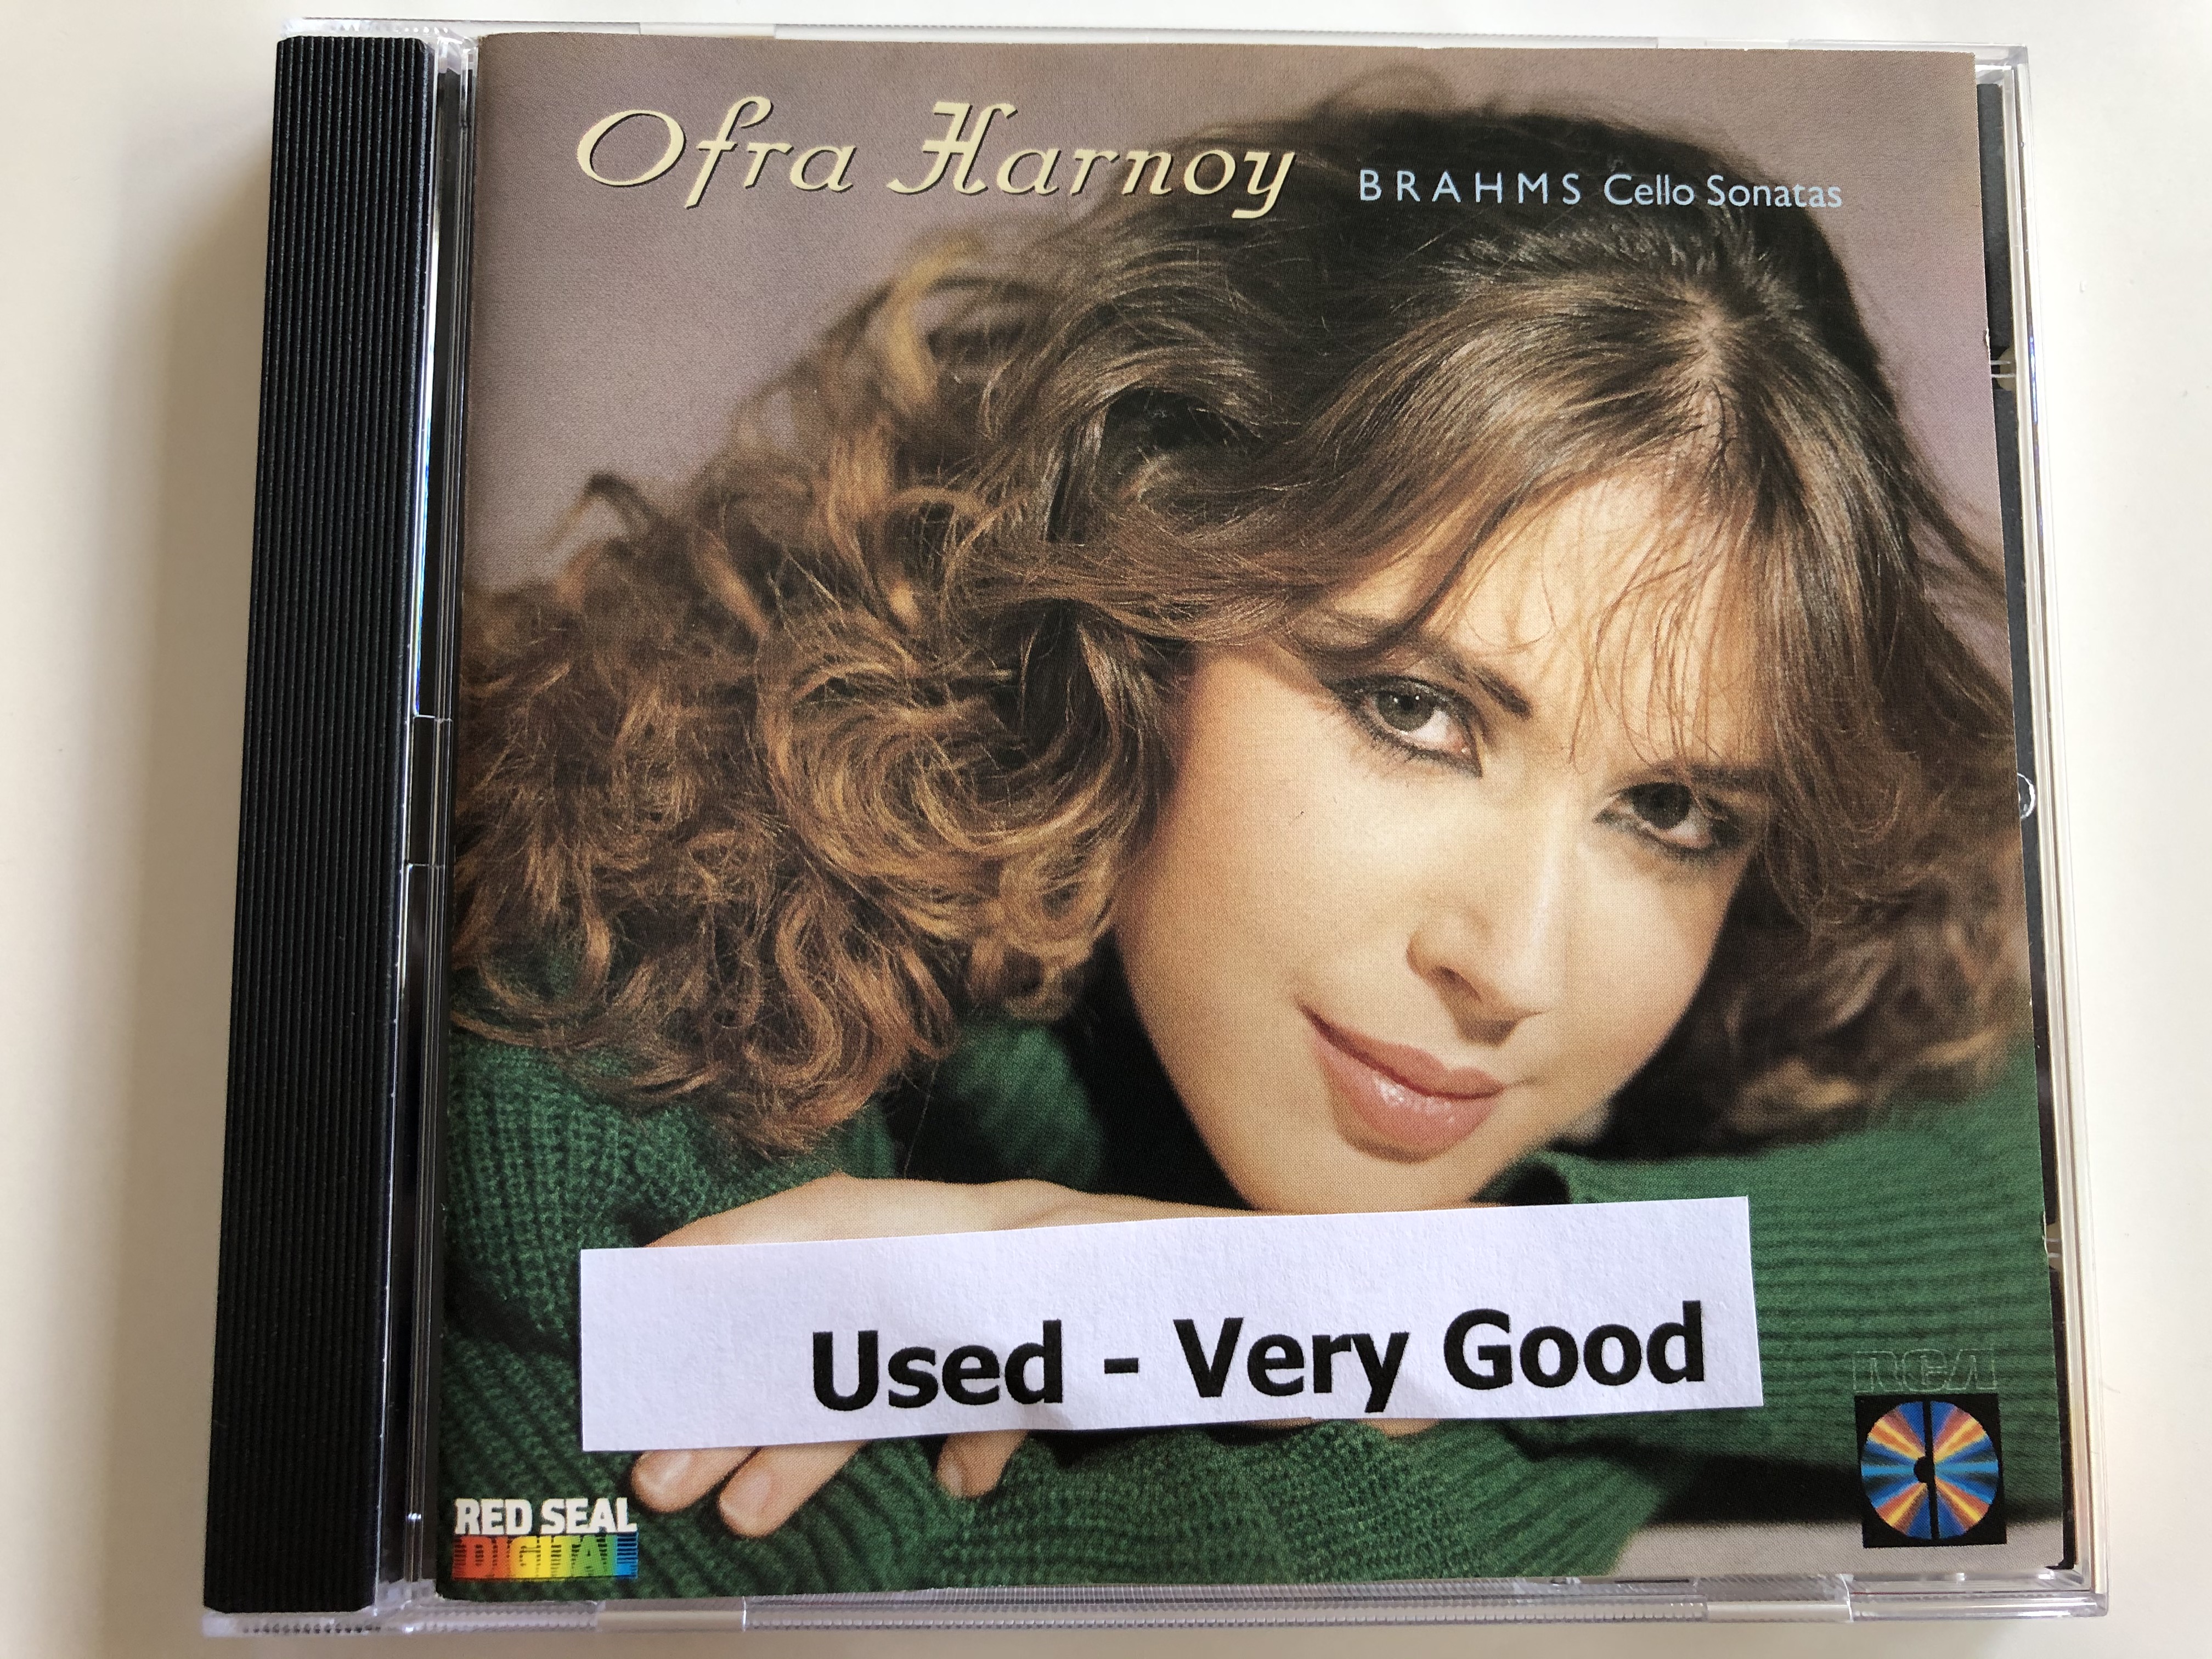 ofra-harnoy-brahms-cello-sonatas-rca-red-seal-audio-cd-1986-rd-71255-1-.jpg